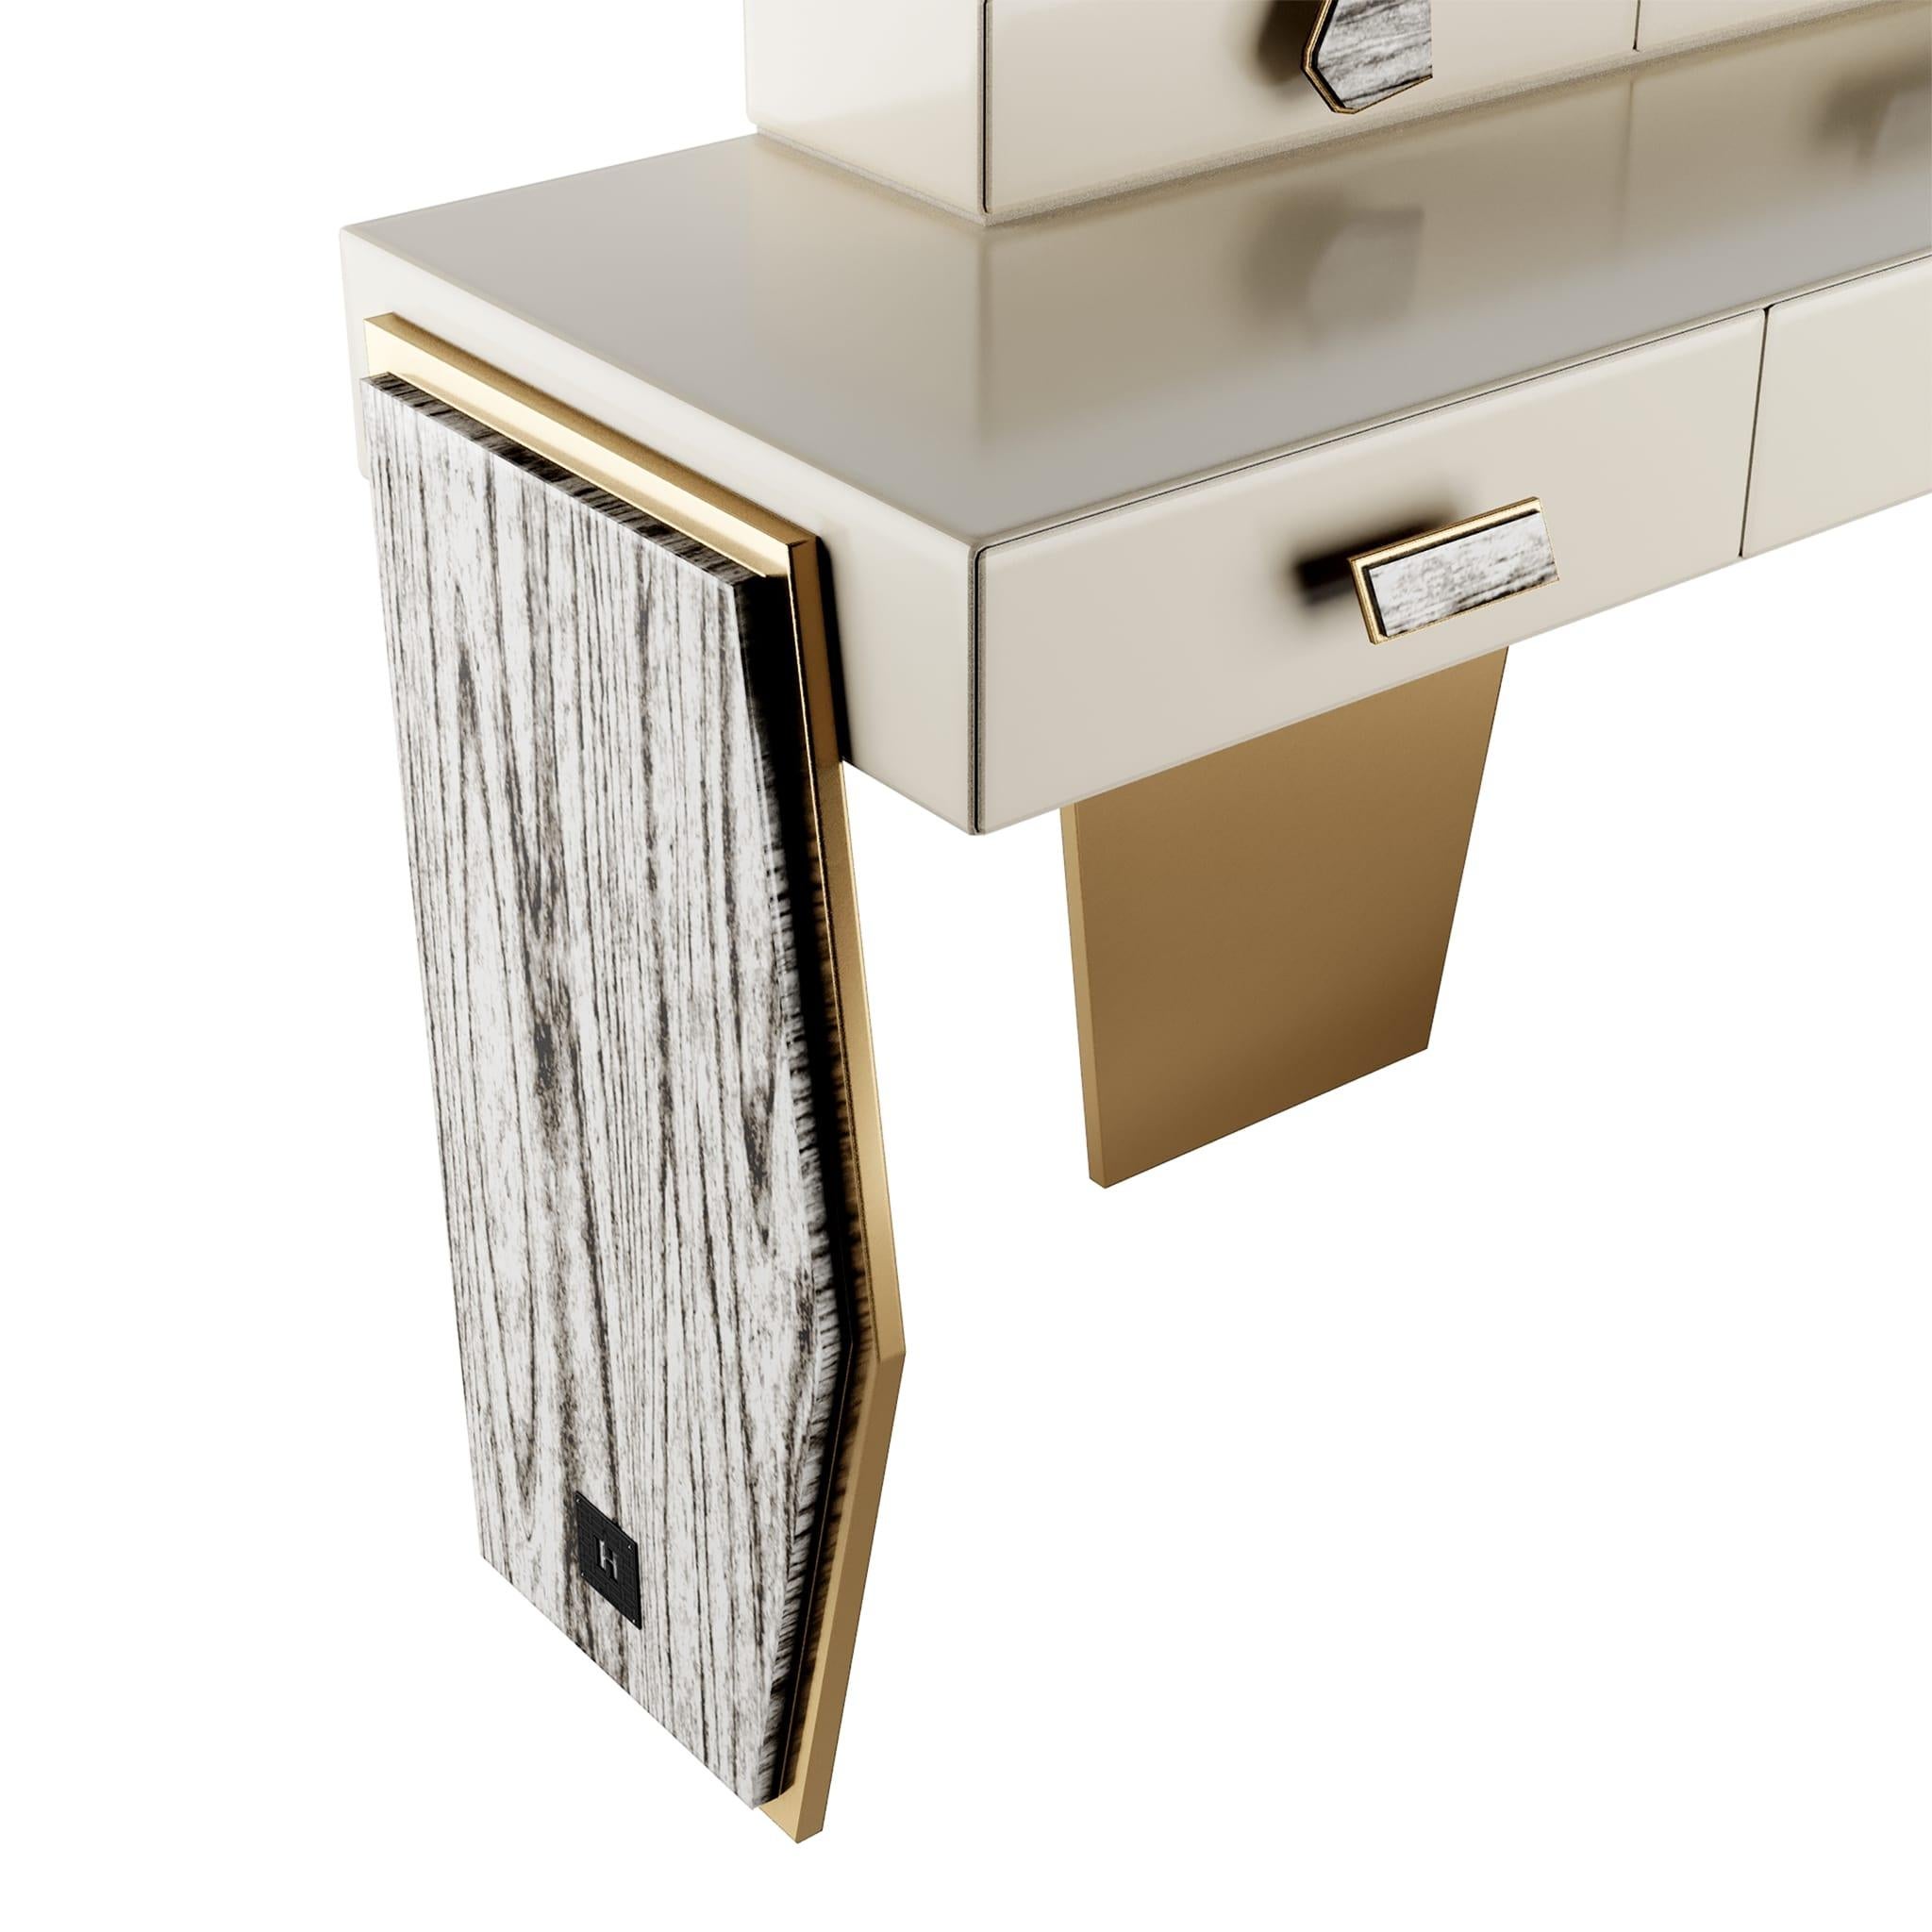 Modern light cream console or dressing table in lacquered wood & polished brass Malala console table

The beautiful Malala console table chooses to be different – it’s a modern piece for contemporary design Let this luxury console table transform